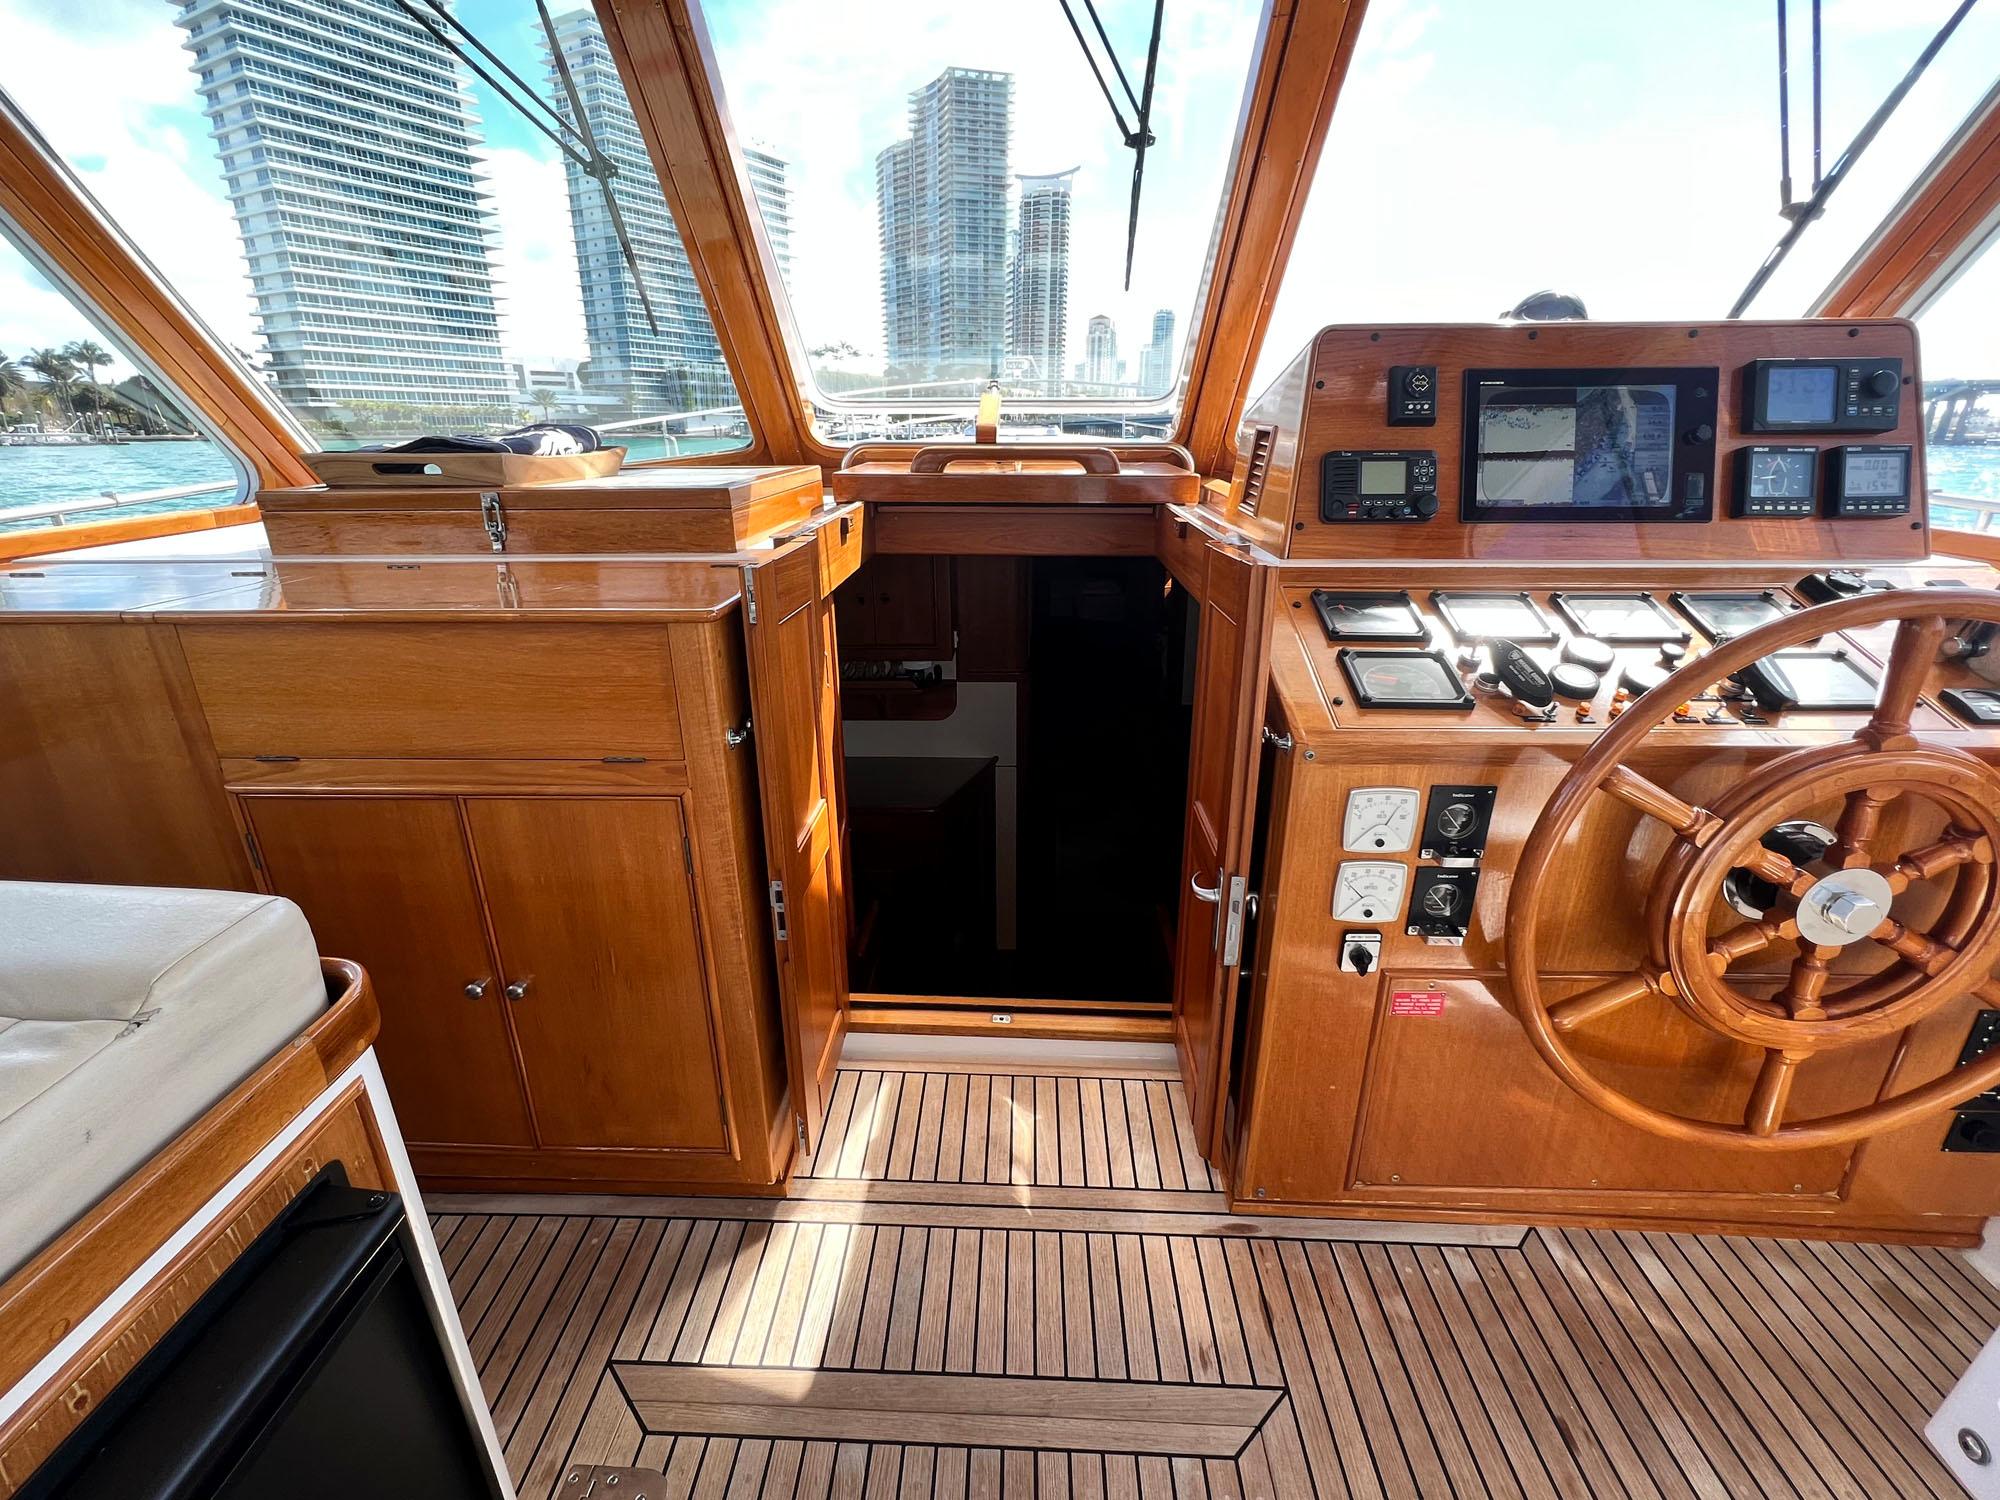 Cabin Entry and Helm